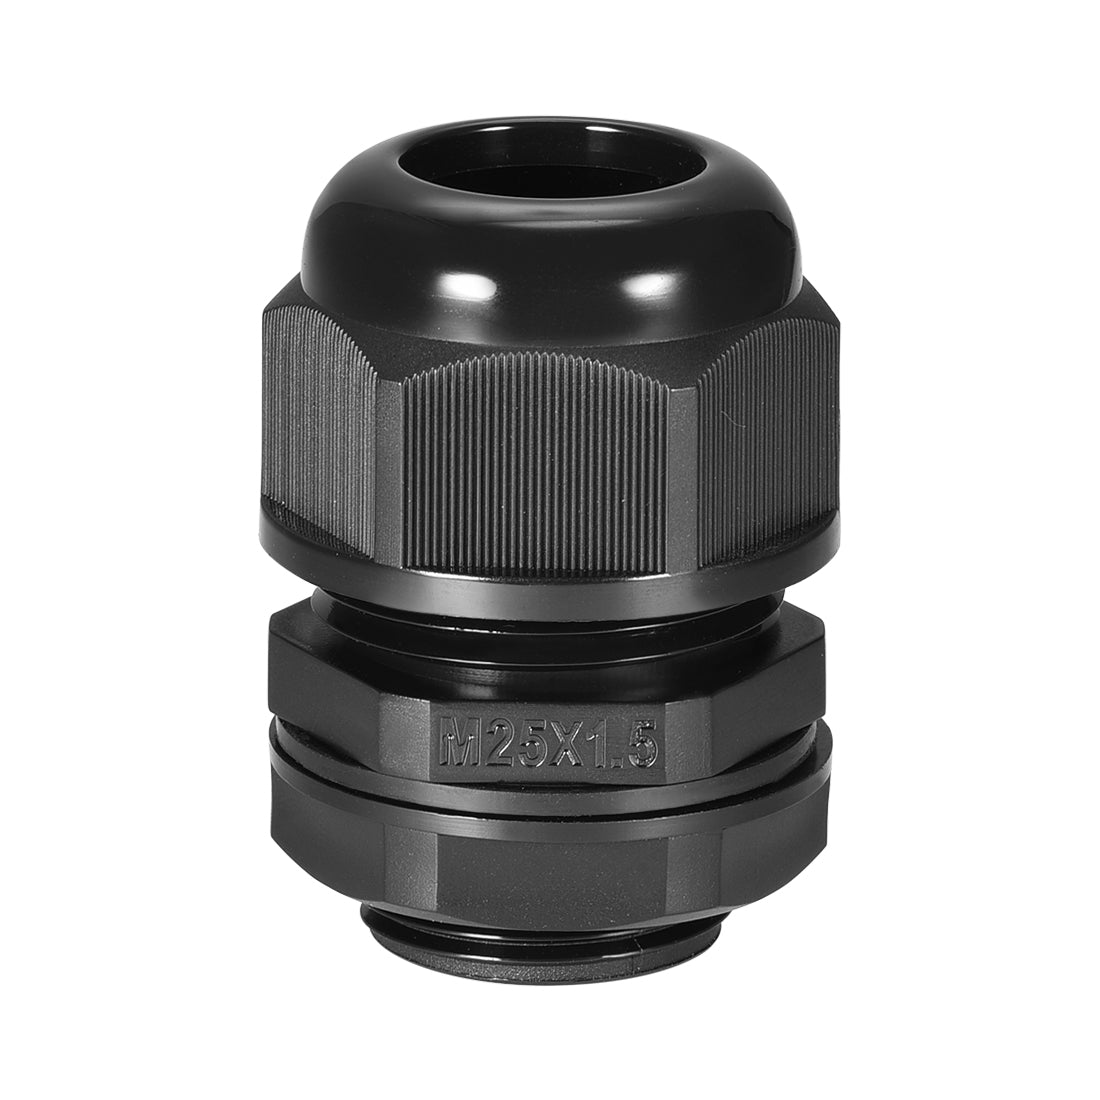 uxcell Uxcell M25 Cable Gland 2 Holes Waterproof IP68 Nylon Joint Adjustable Locknut for 6.4-8.7mm Dia Wire